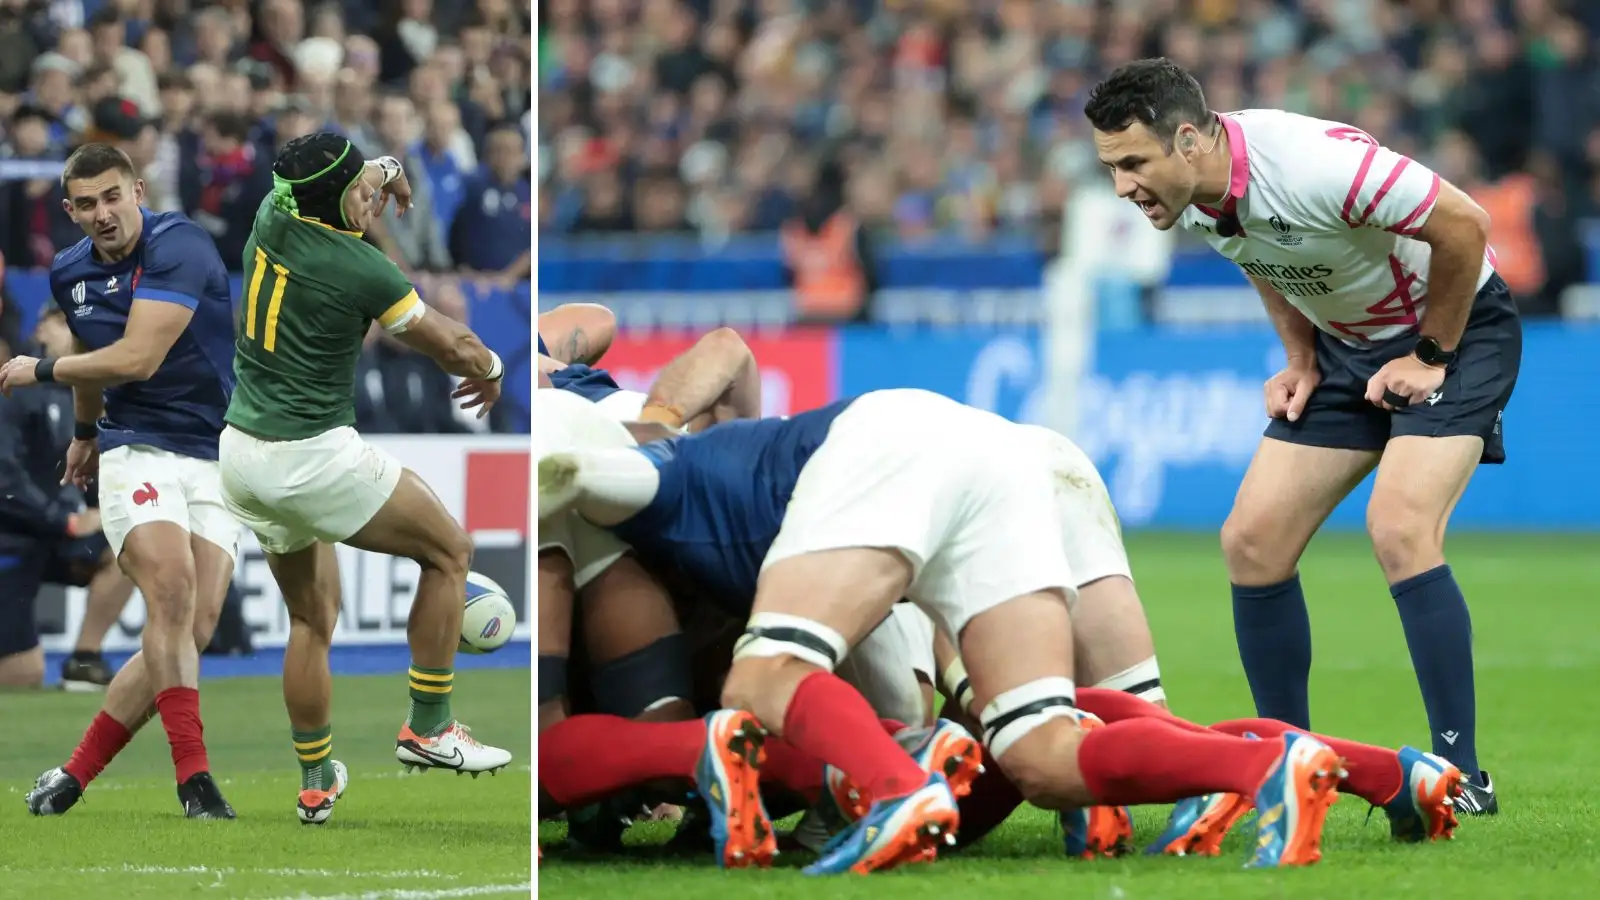 Cheslin Kolbe charge down on Thomas Ramos and referee Ben O'Keeffe during the Rugby World Cup match between France and South Africa